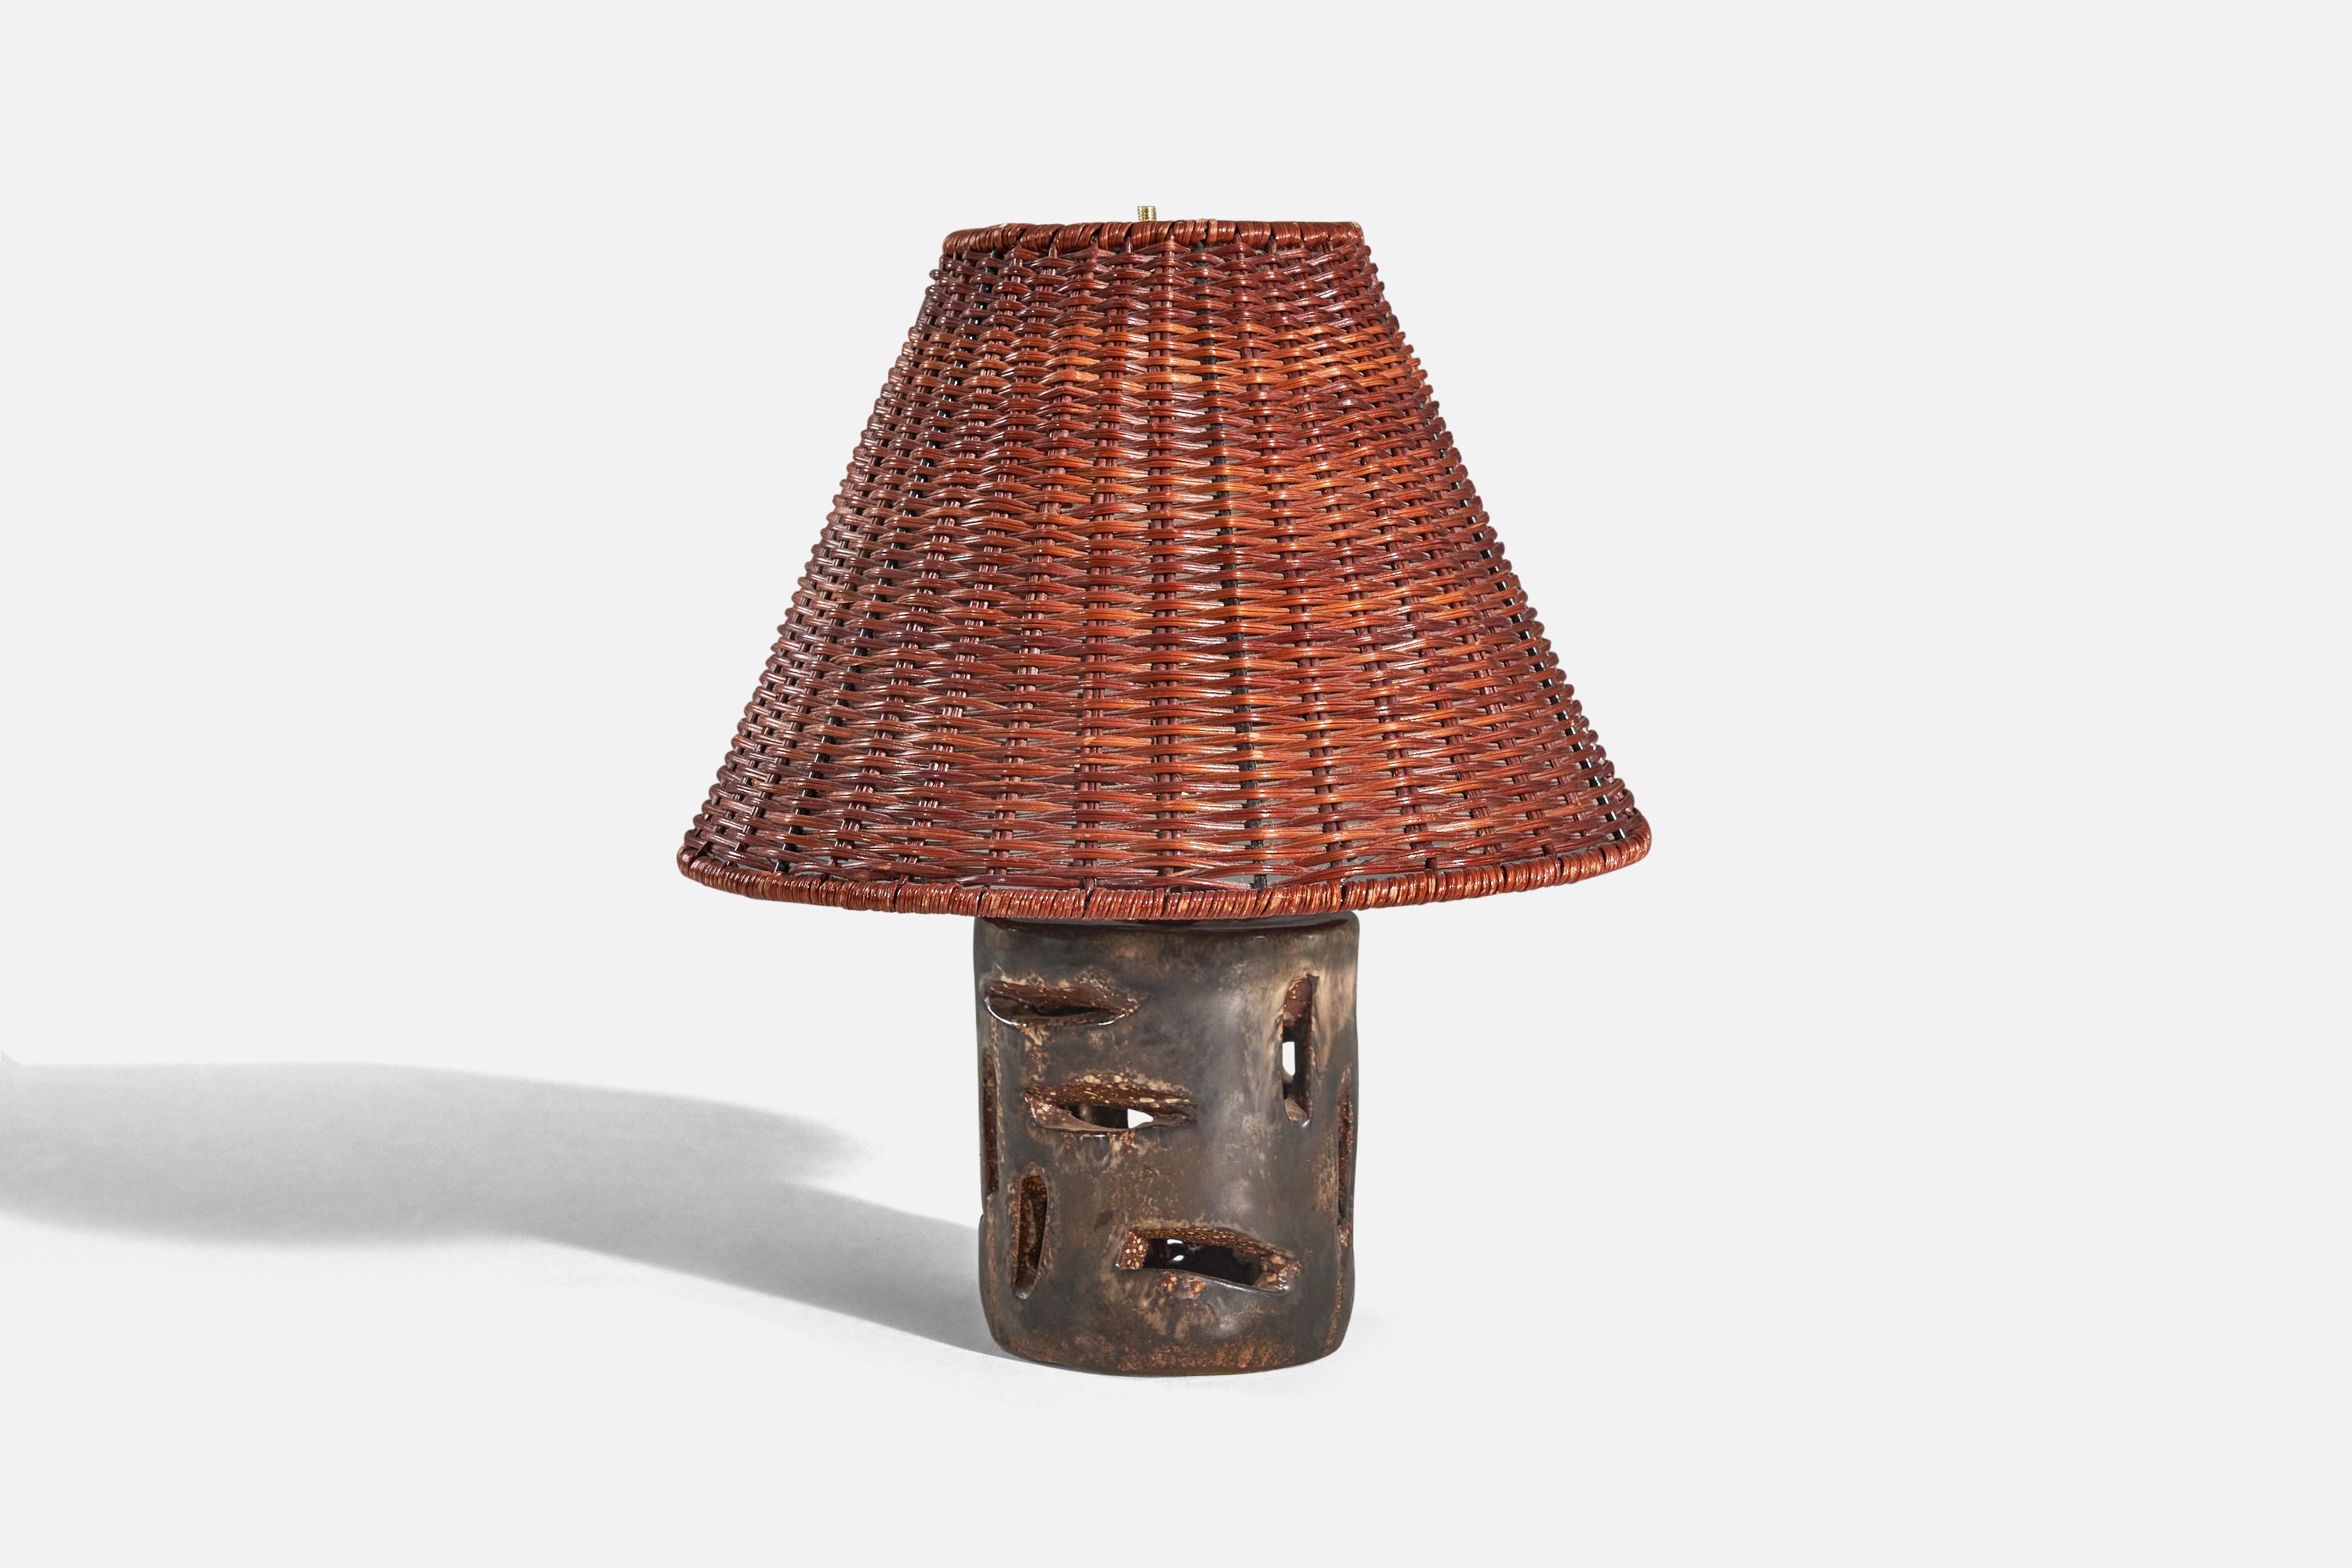 A brown ceramic and rattan table lamp designed and produced by an American designer, 1960s. 

Sold with lampshade. 
Dimensions of lamp (inches) : 9 x 4.81 x 4.81 (H x W x D)
Dimensions of shade (inches) : 5 x 12 x 8.5 (top diameter x bottom